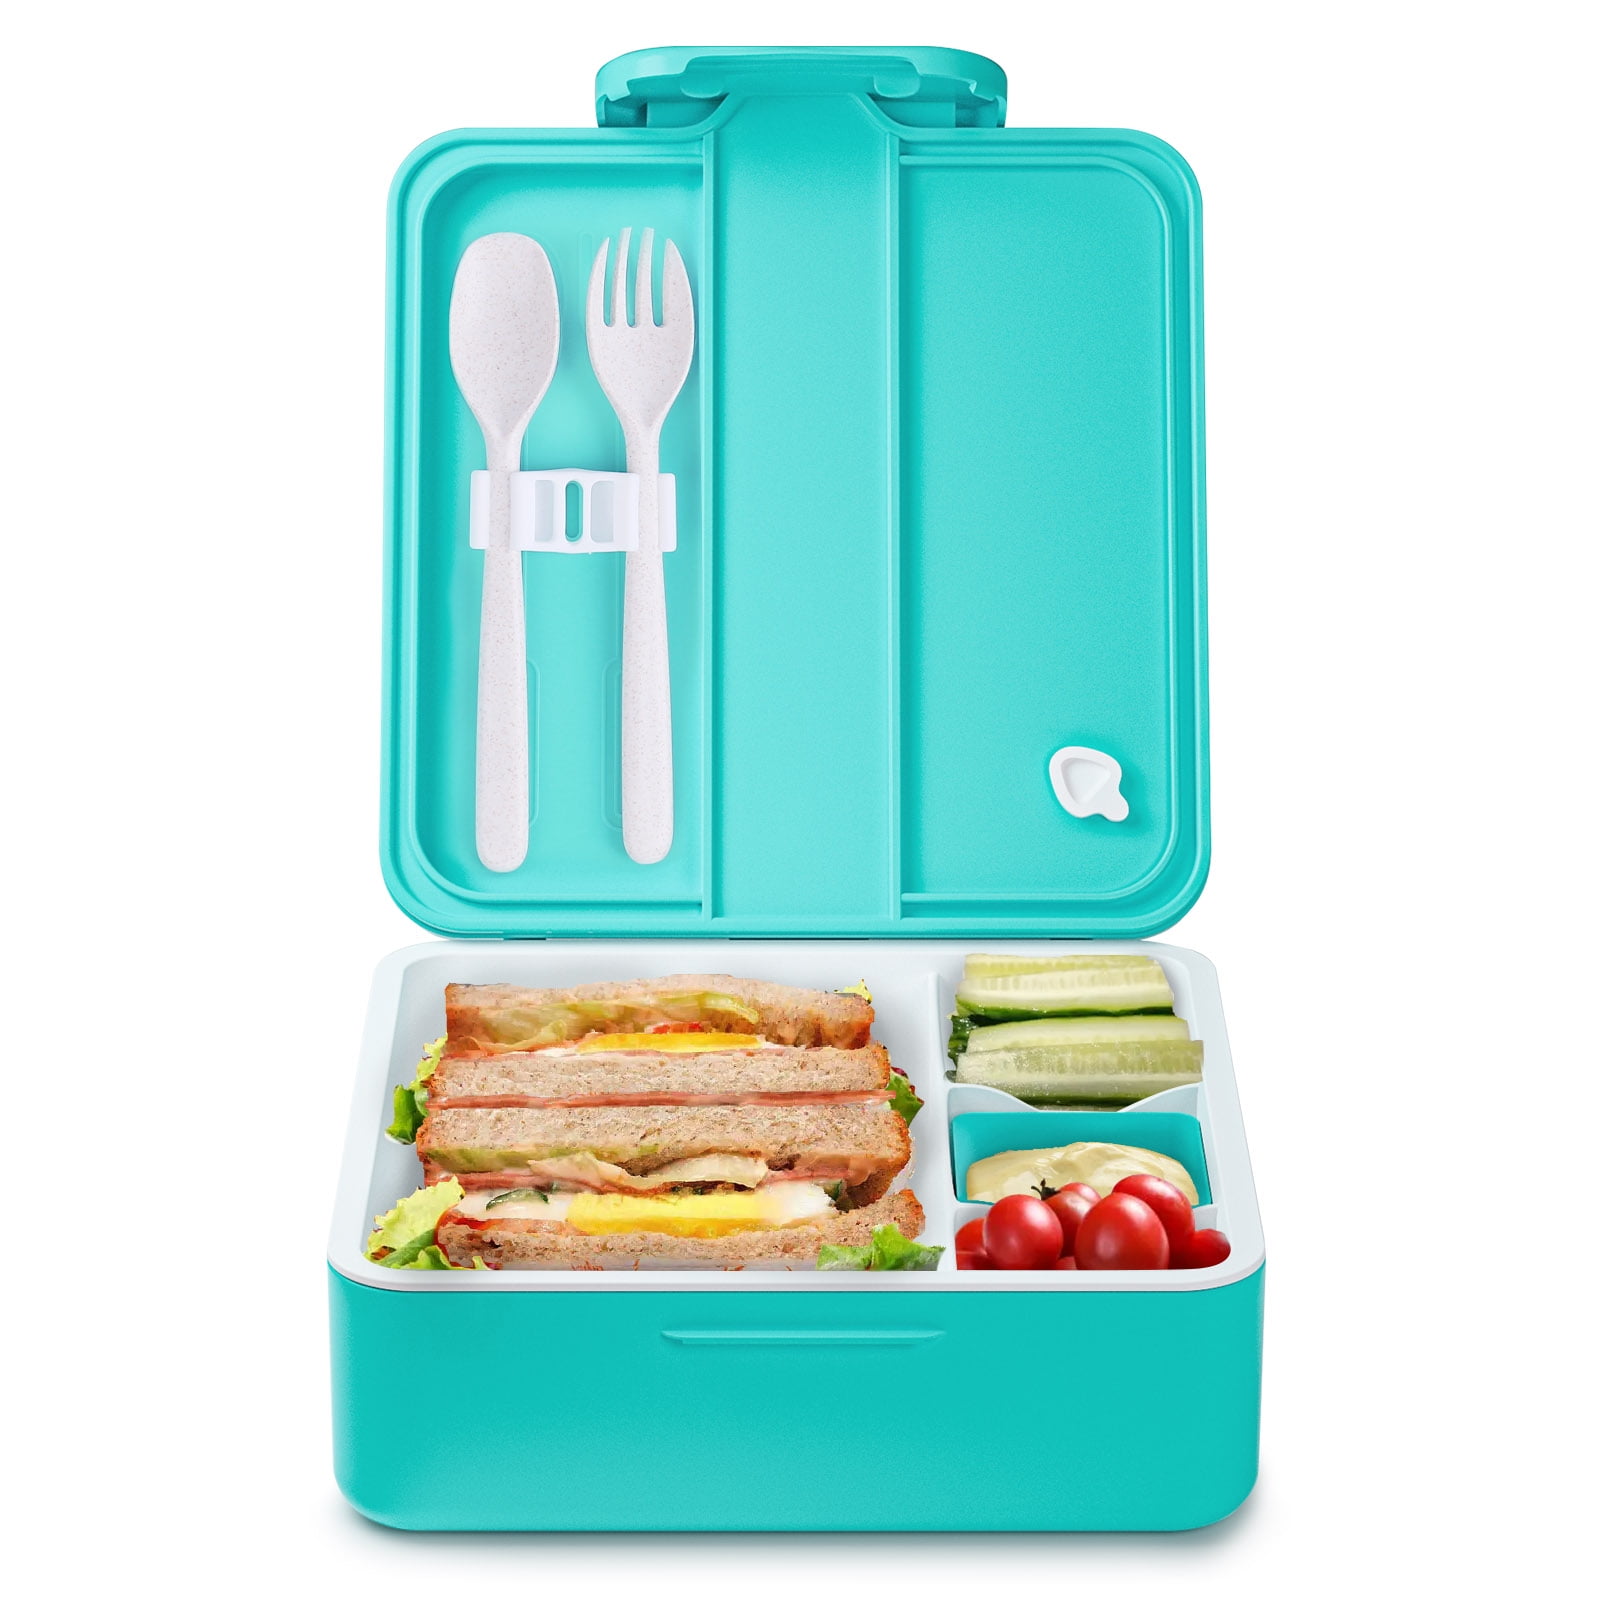 Jelife Bento Box for Kids Leakproof Bento Box Kids Lunch Box 4 Compartment Lunch Box Microwave Freezer Dishwasher Bento Box with Reusable Cutlery for Kids School Picnics Travel Blue 